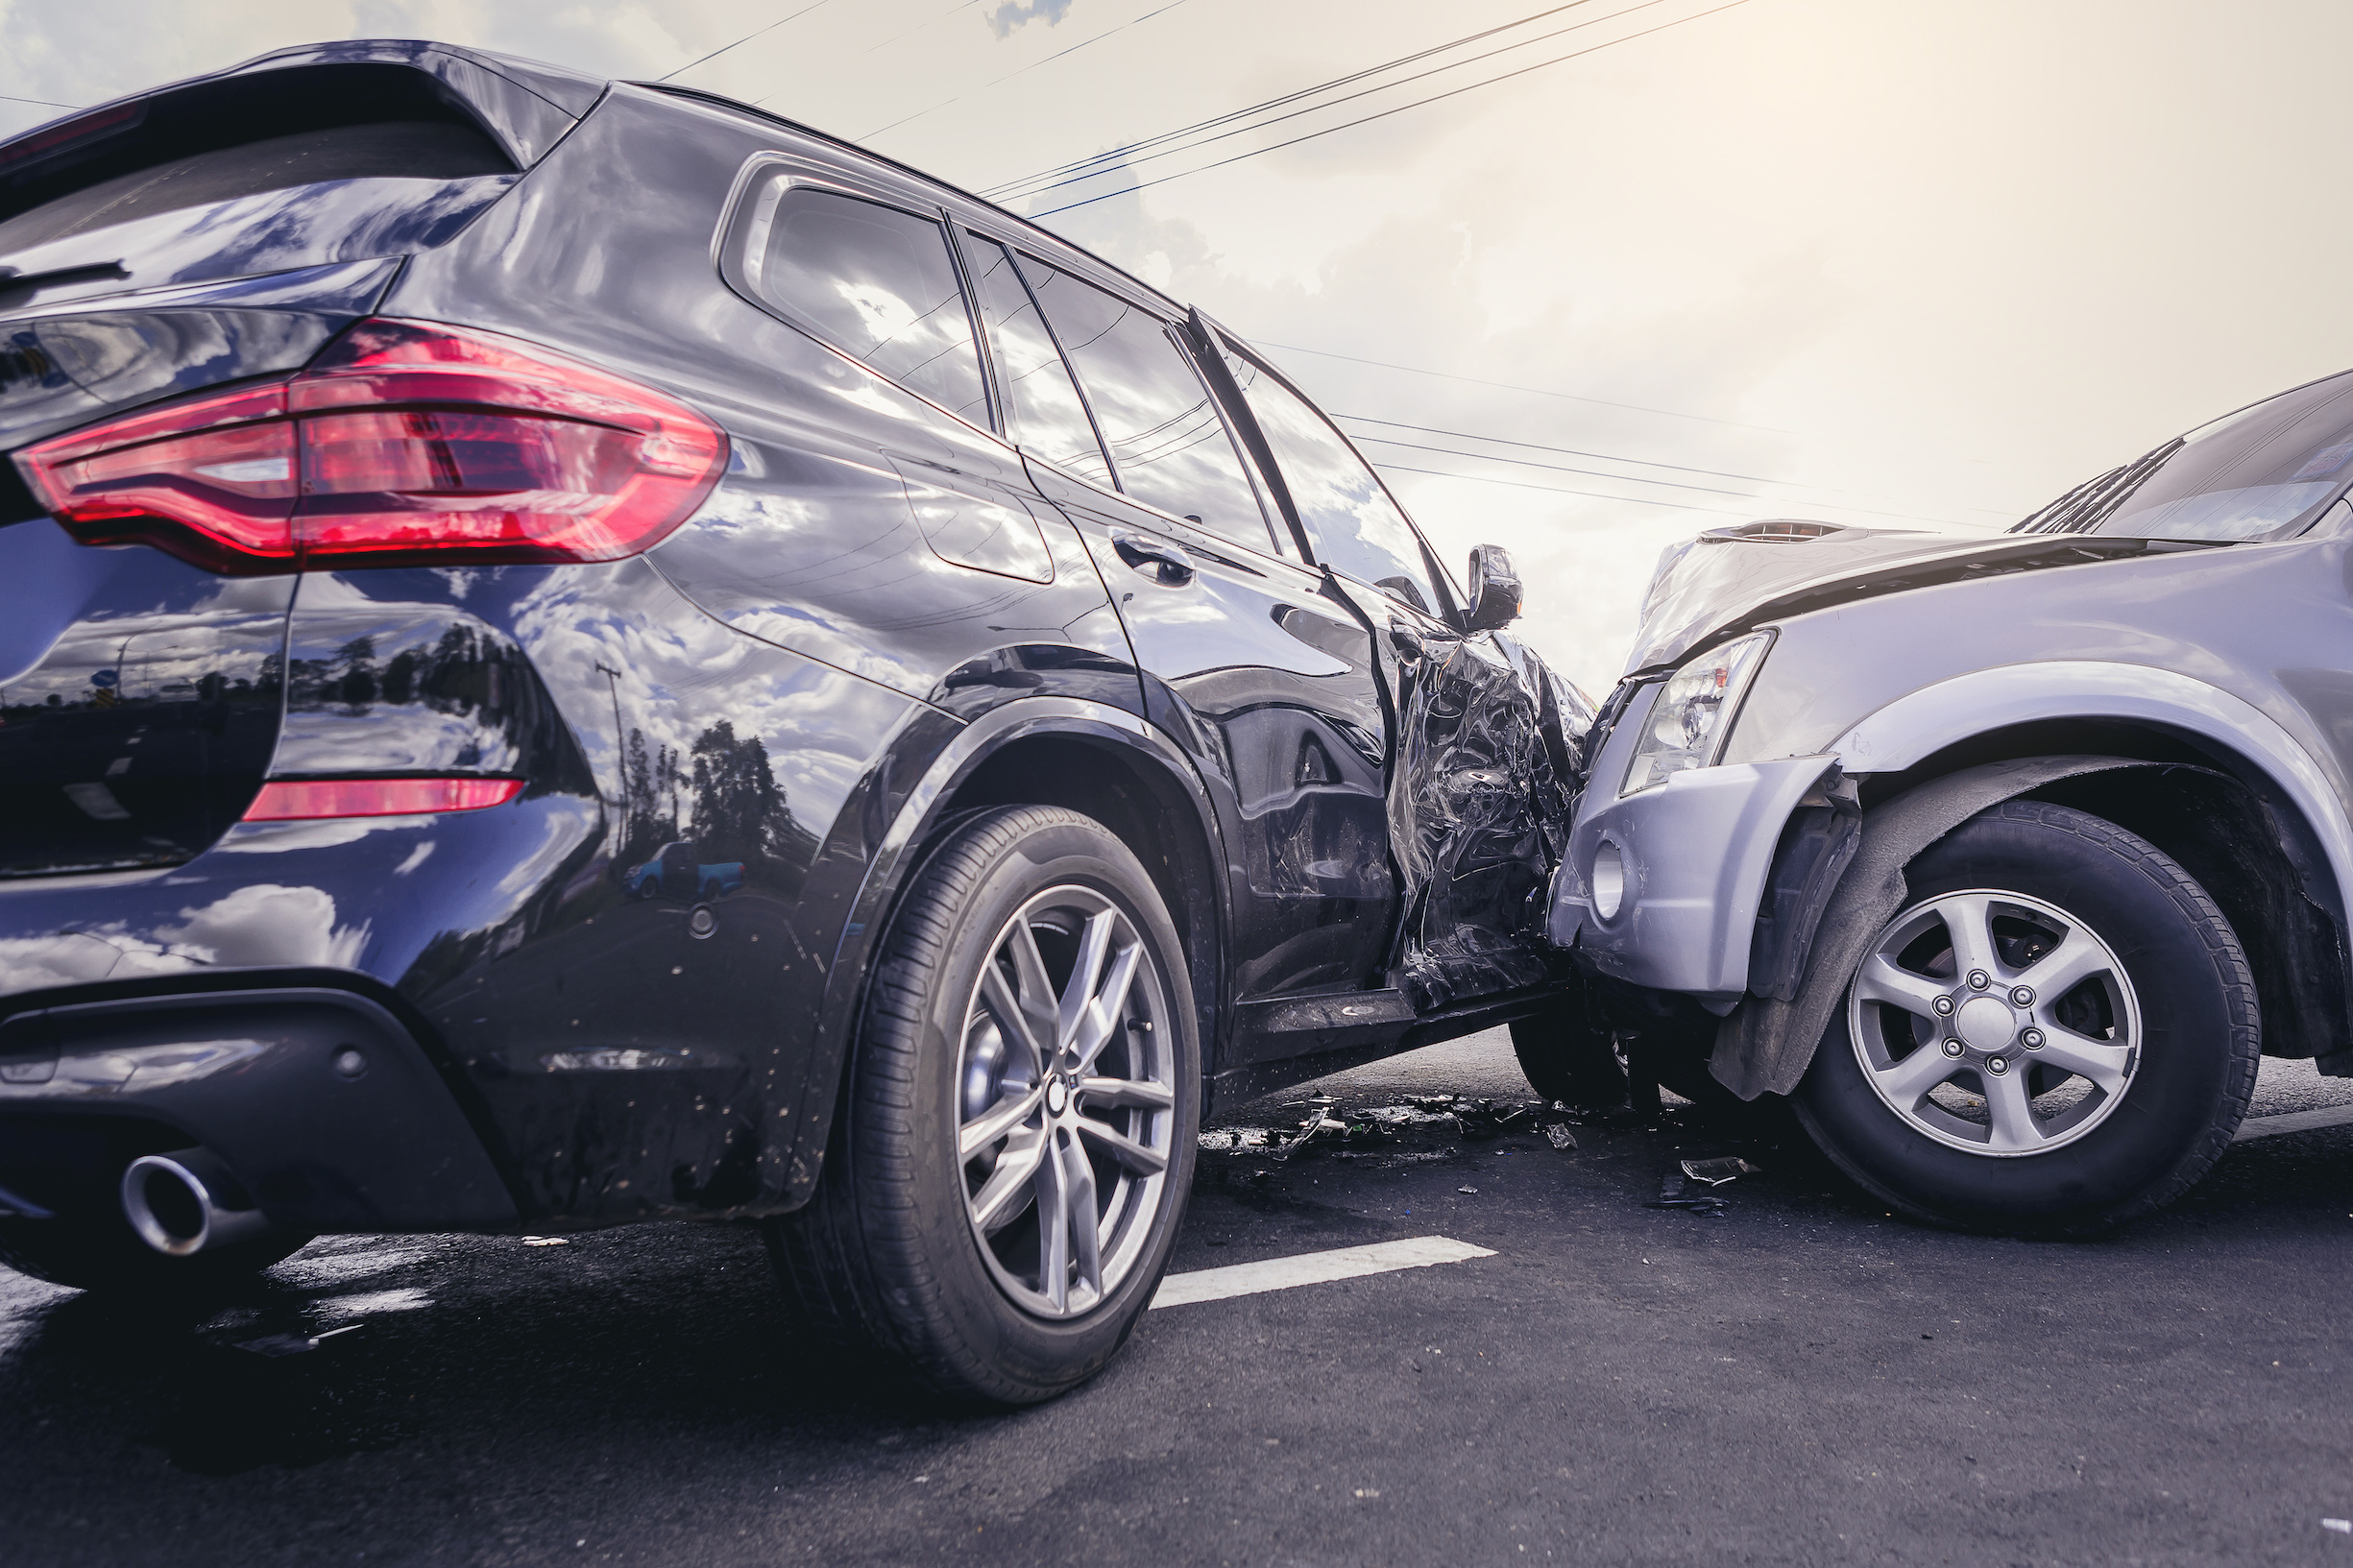 How is Fault Determined After an Auto Accident?